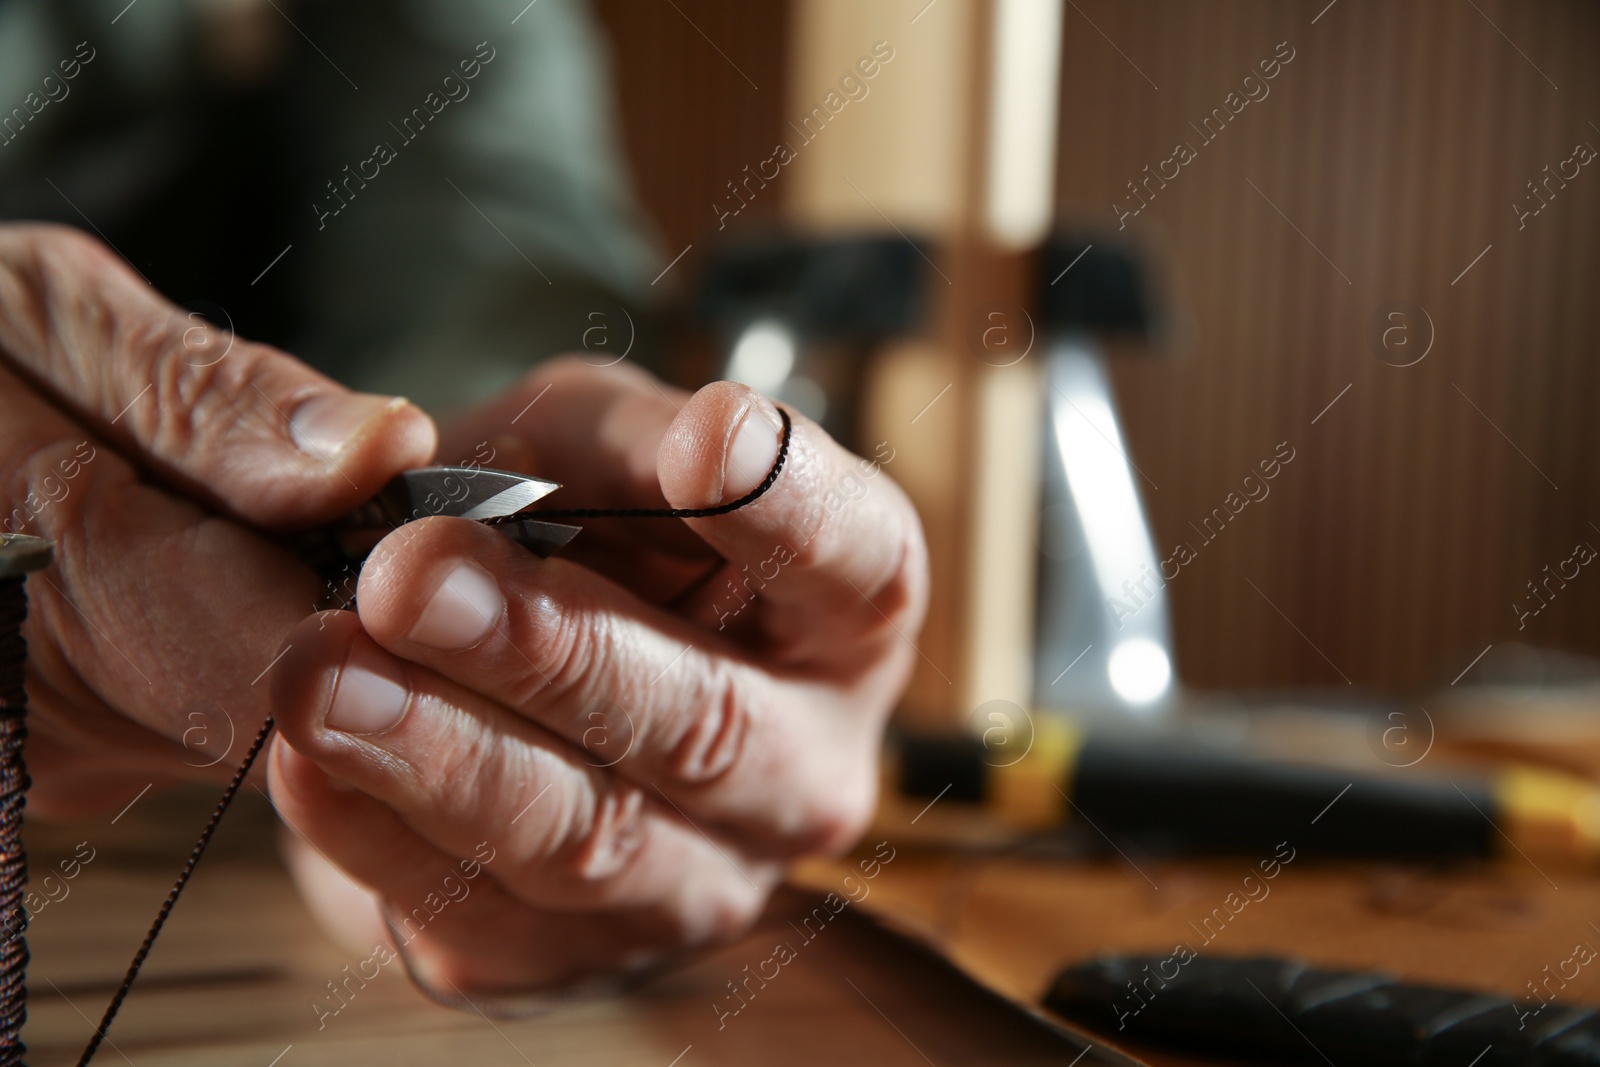 Photo of Man cutting thread while working with leather at table, closeup